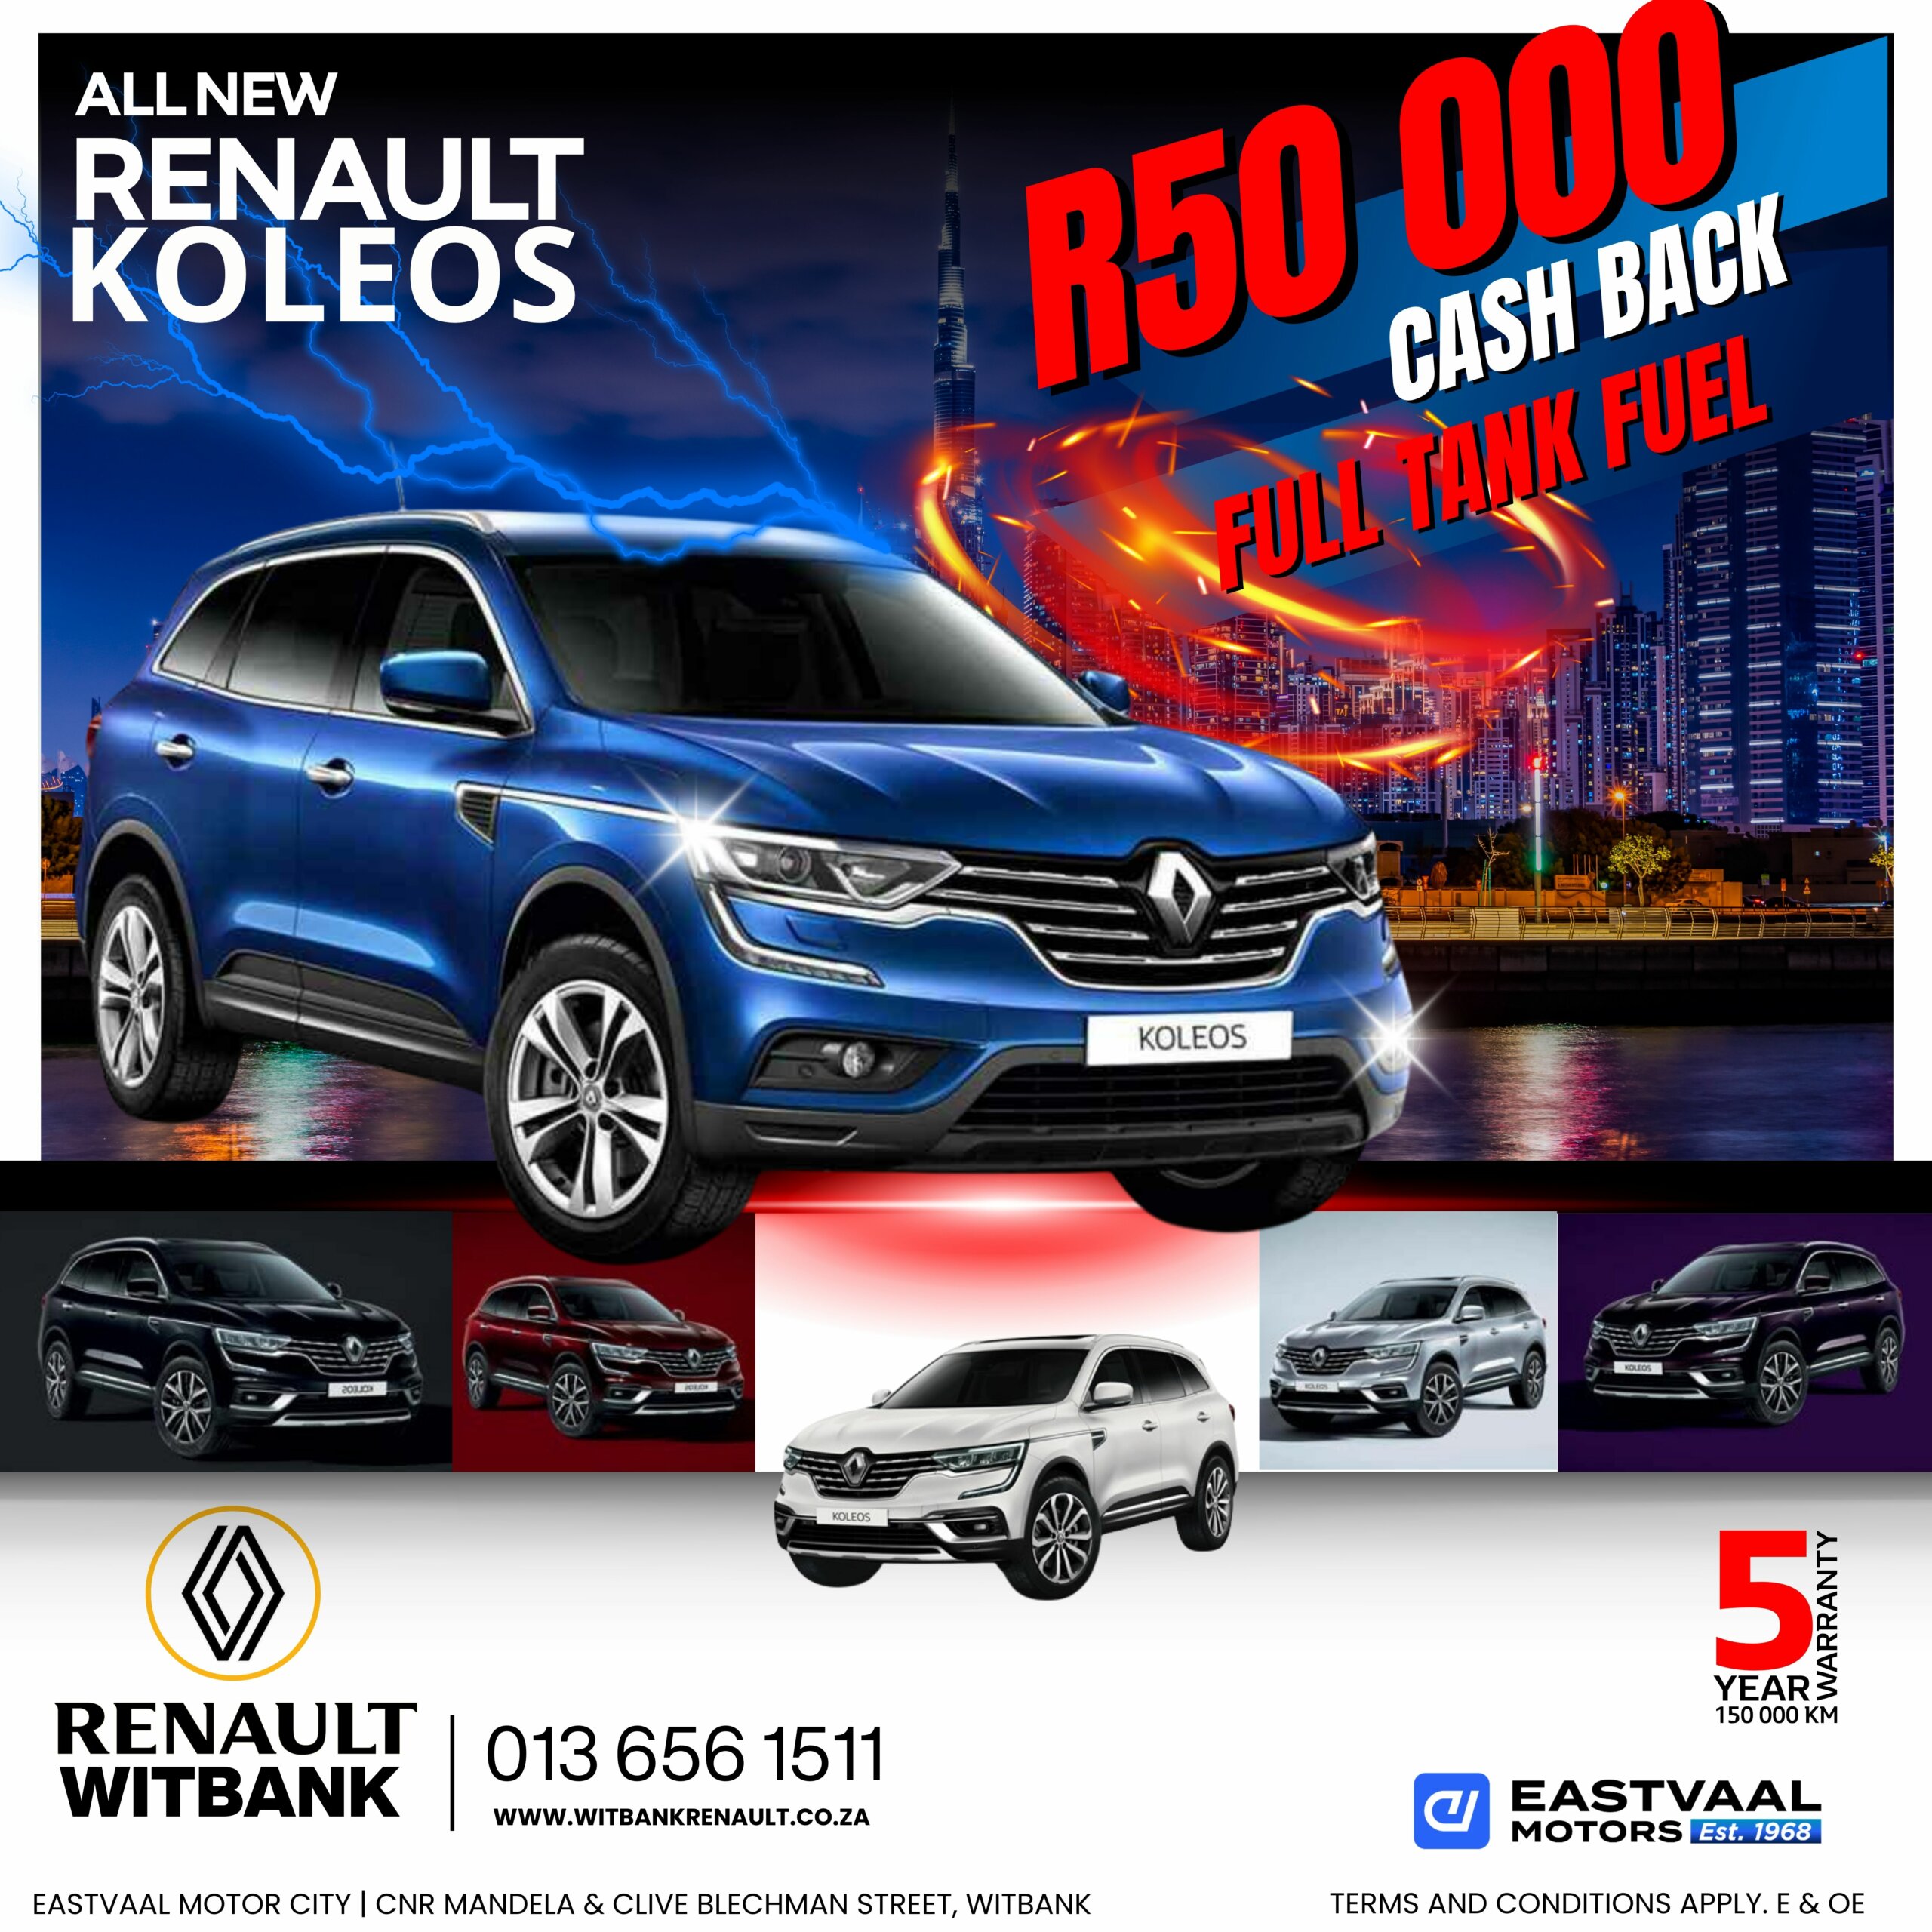 Work Hard, Ride Smart Celebrate Worker’s Day with this Exclusive Offer image from Eastvaal Motors